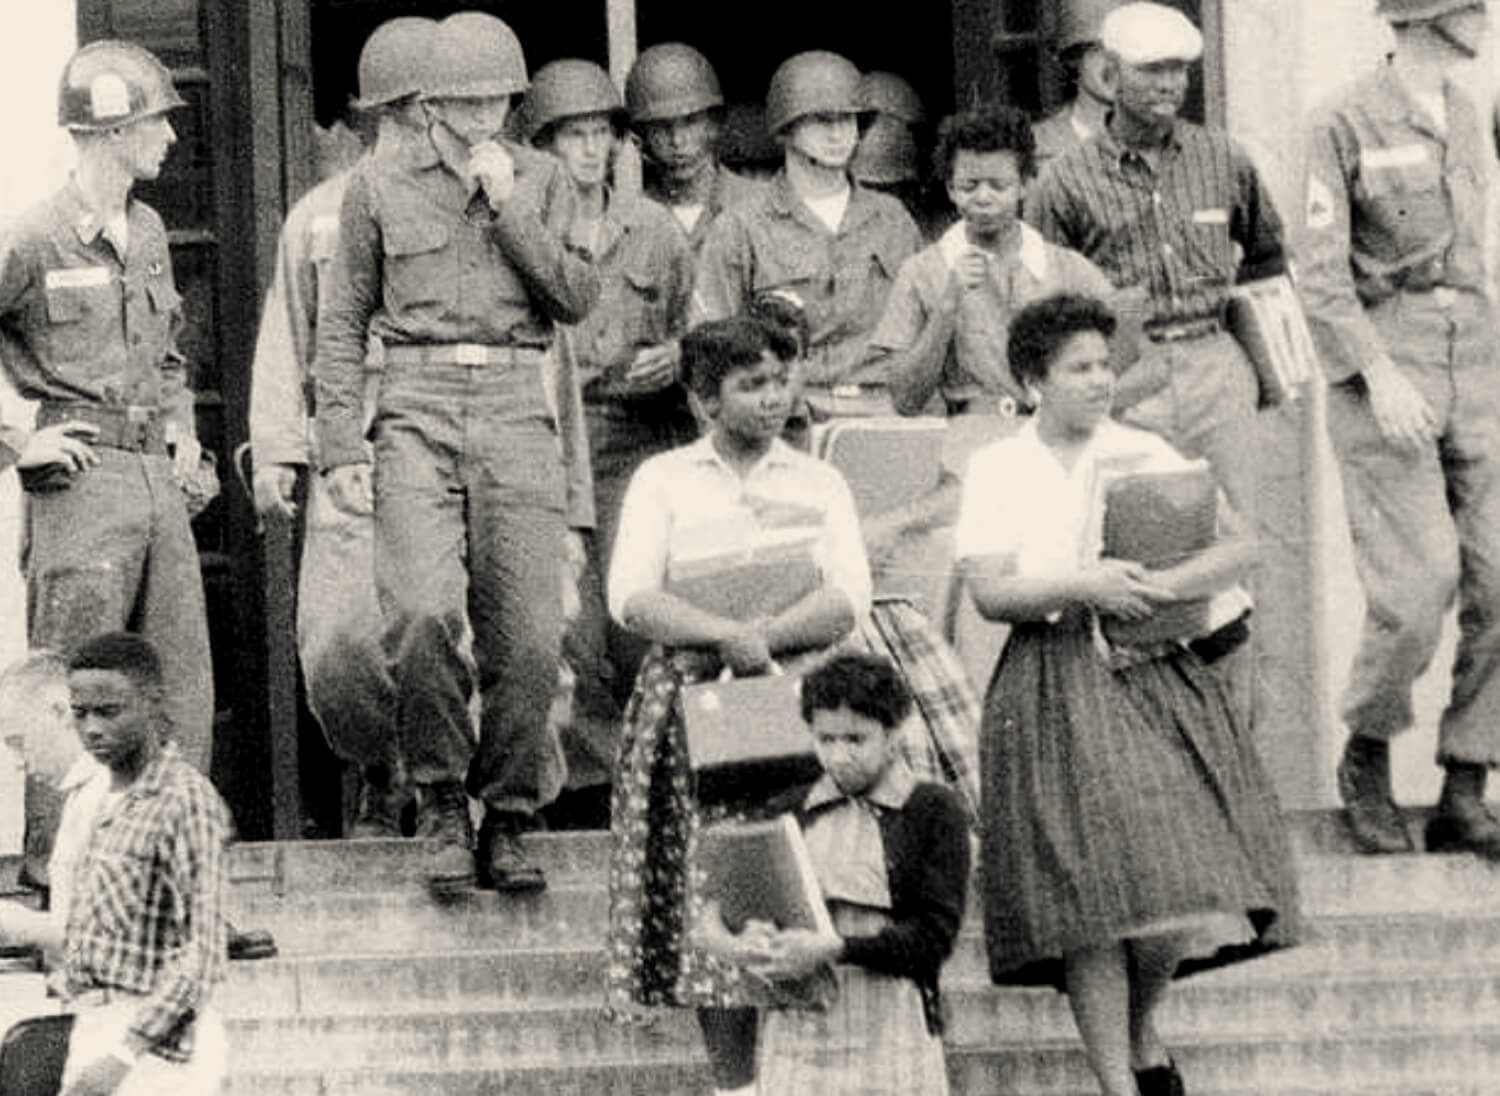 Arkansas National Guard at Little Rock Central High School, Little Rock Central High School National Historic Site, 1957